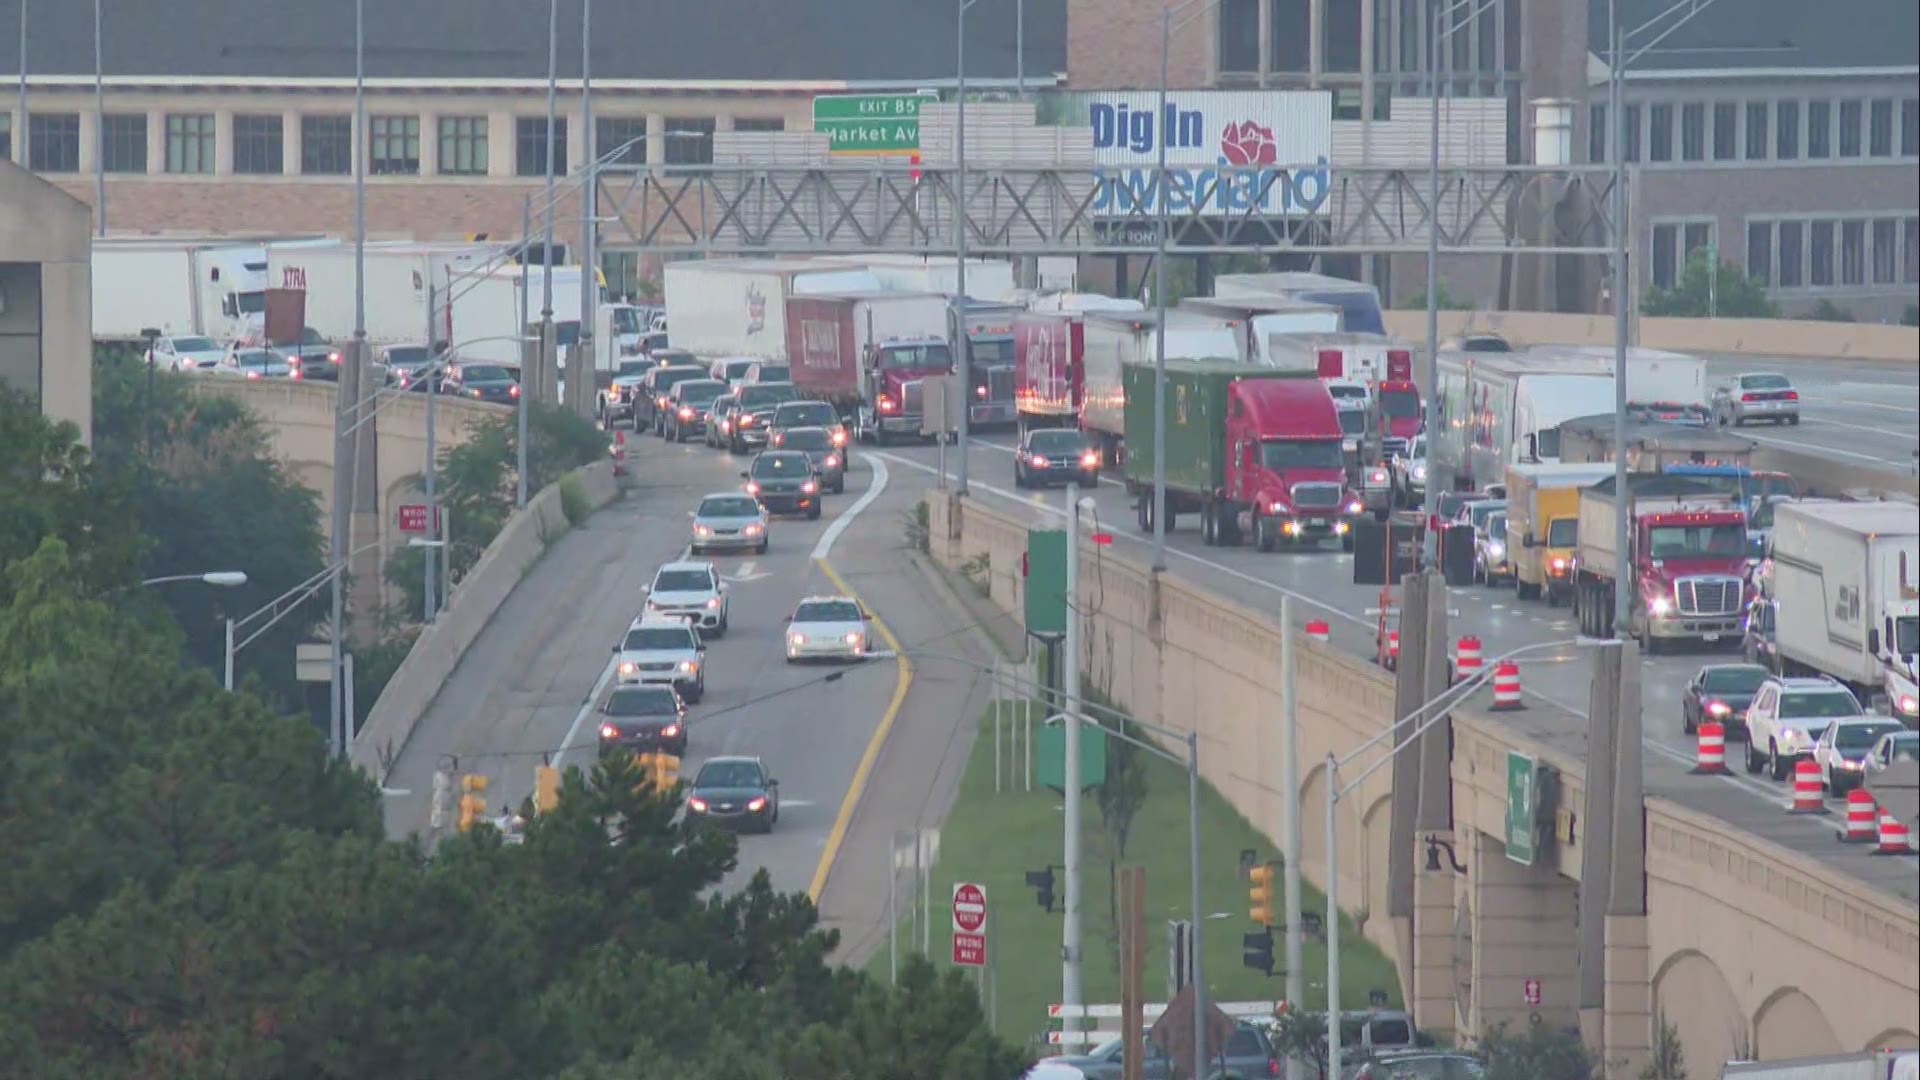 MDOT says all lanes of NB US-131 near I-196 in downtown Grand Rapids are shut down.